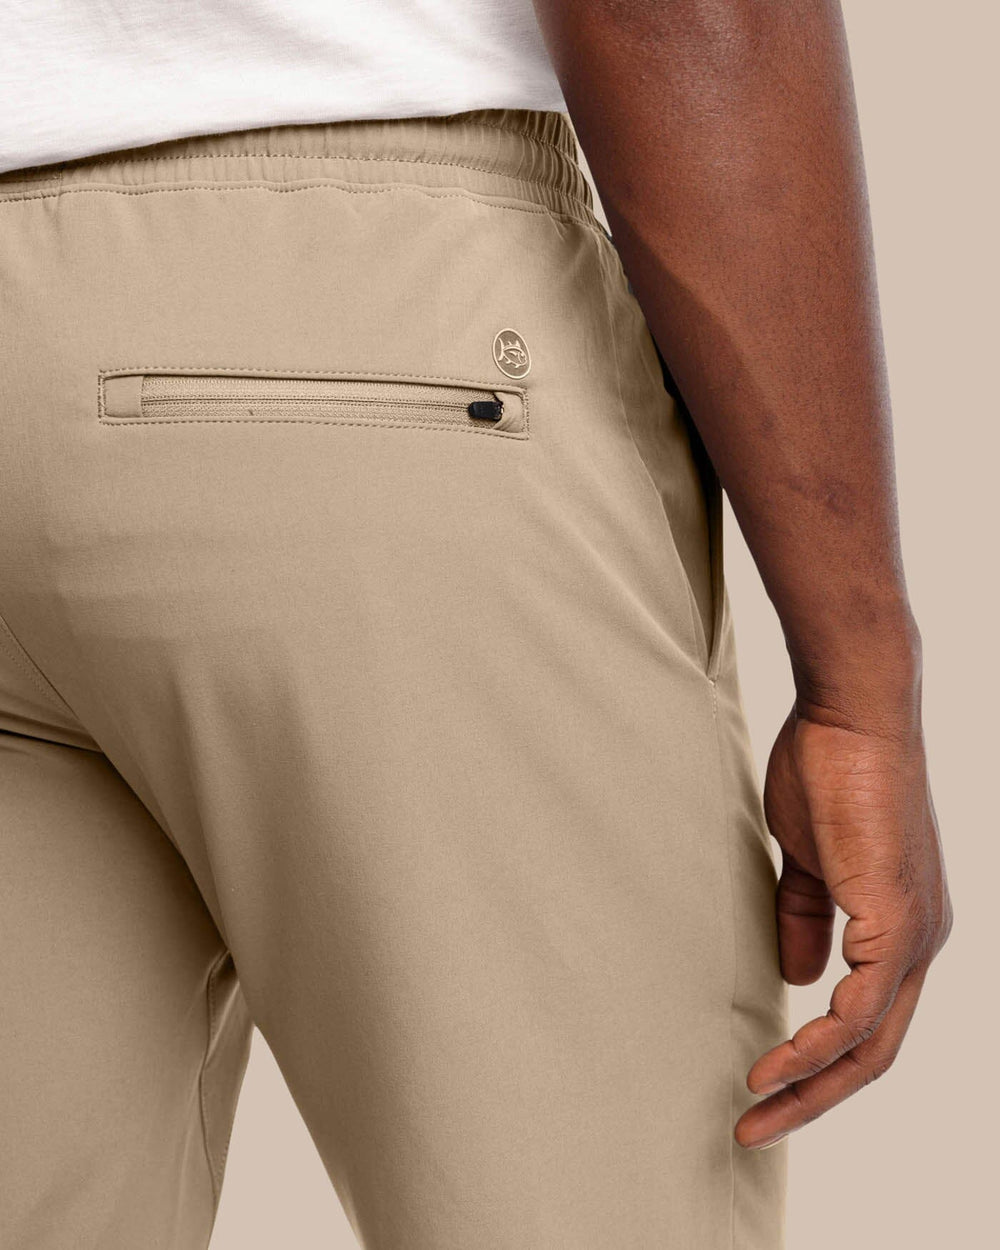 The detail view of the Southern Tide The Excursion Performance Jogger by Southern Tide - Sandstone Khaki